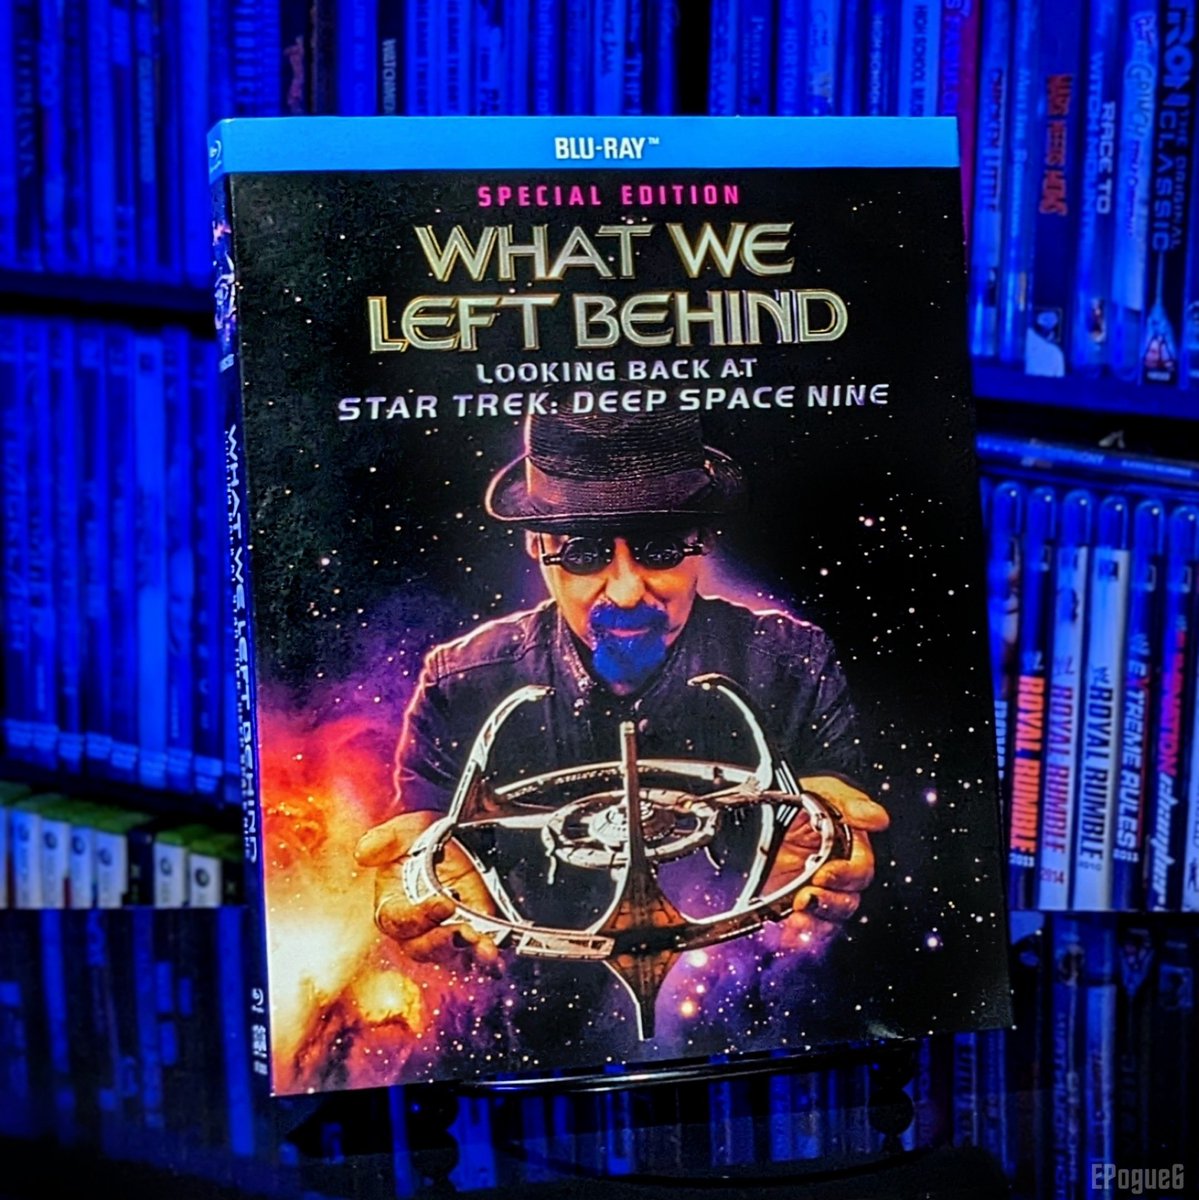 Today marks the 30th Anniversary of the first episode of #StarTrekDeepSpaceNine.

And I can think of no better day to watch this amazing documentary 'What We Left Behind'.
It is  by far the best retrospective look at what was and what could have been in the DS9 story. #DS930